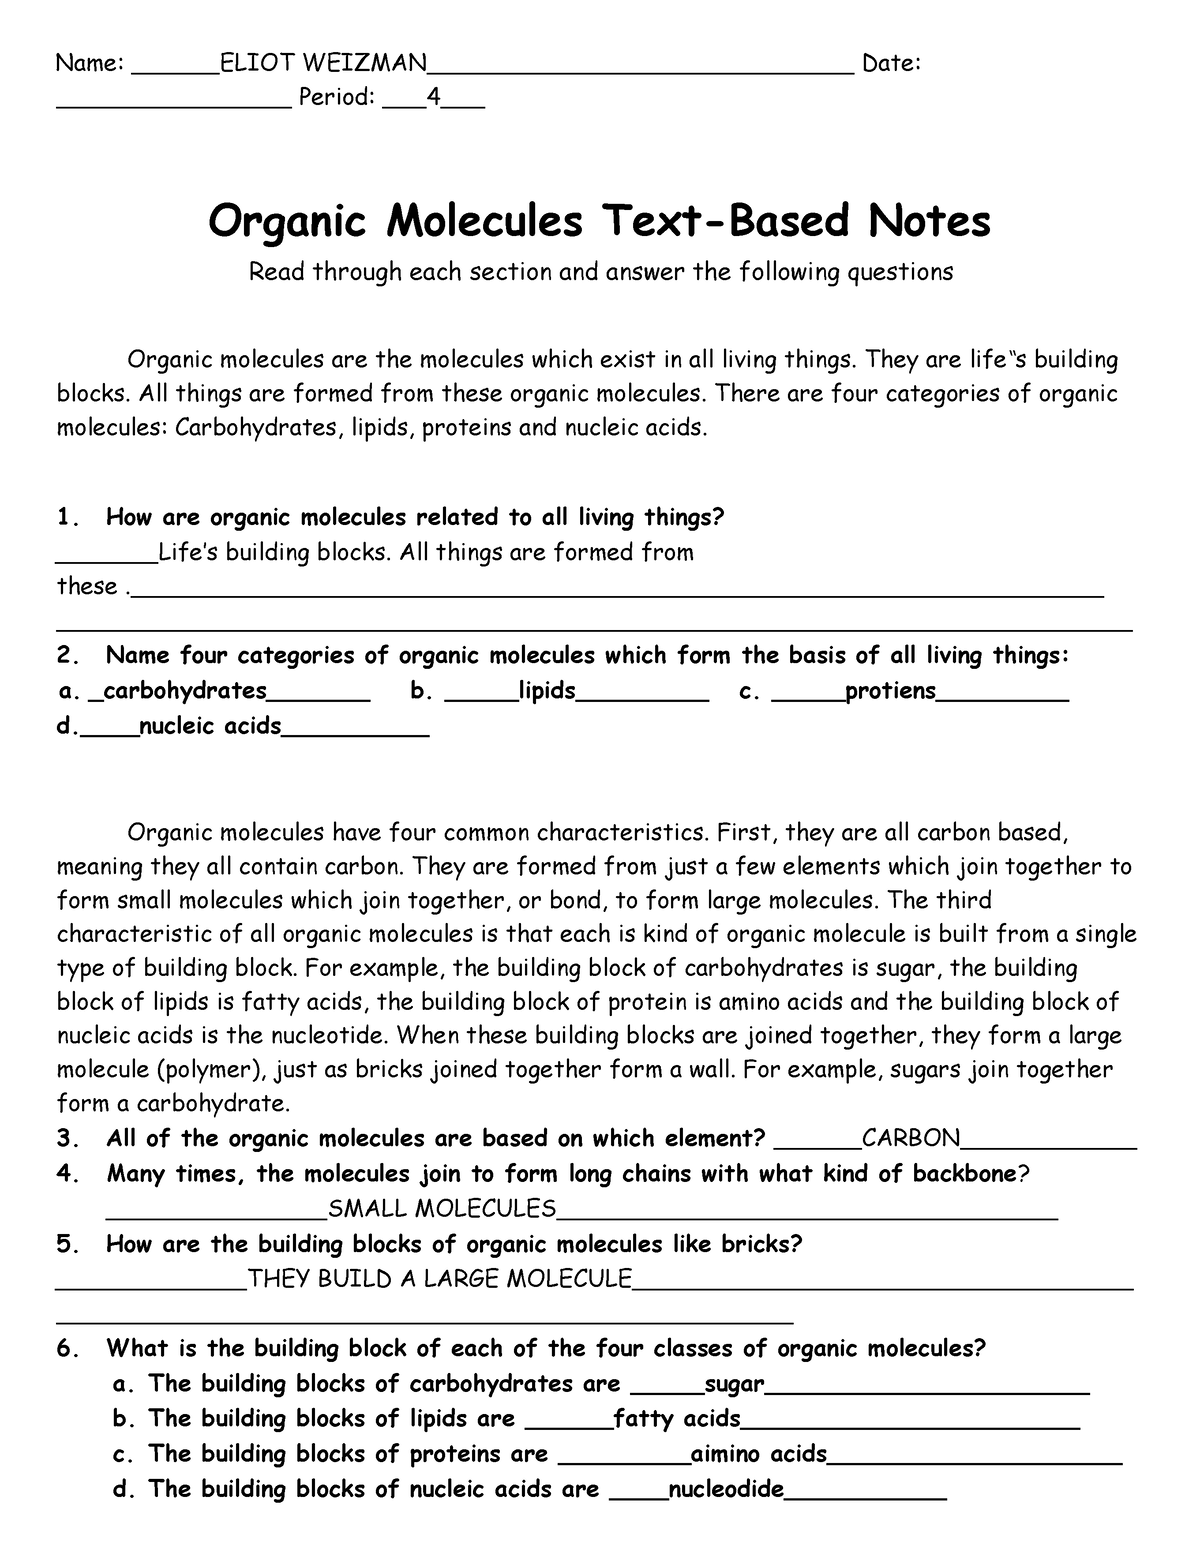 how are organic molecules related to all living things